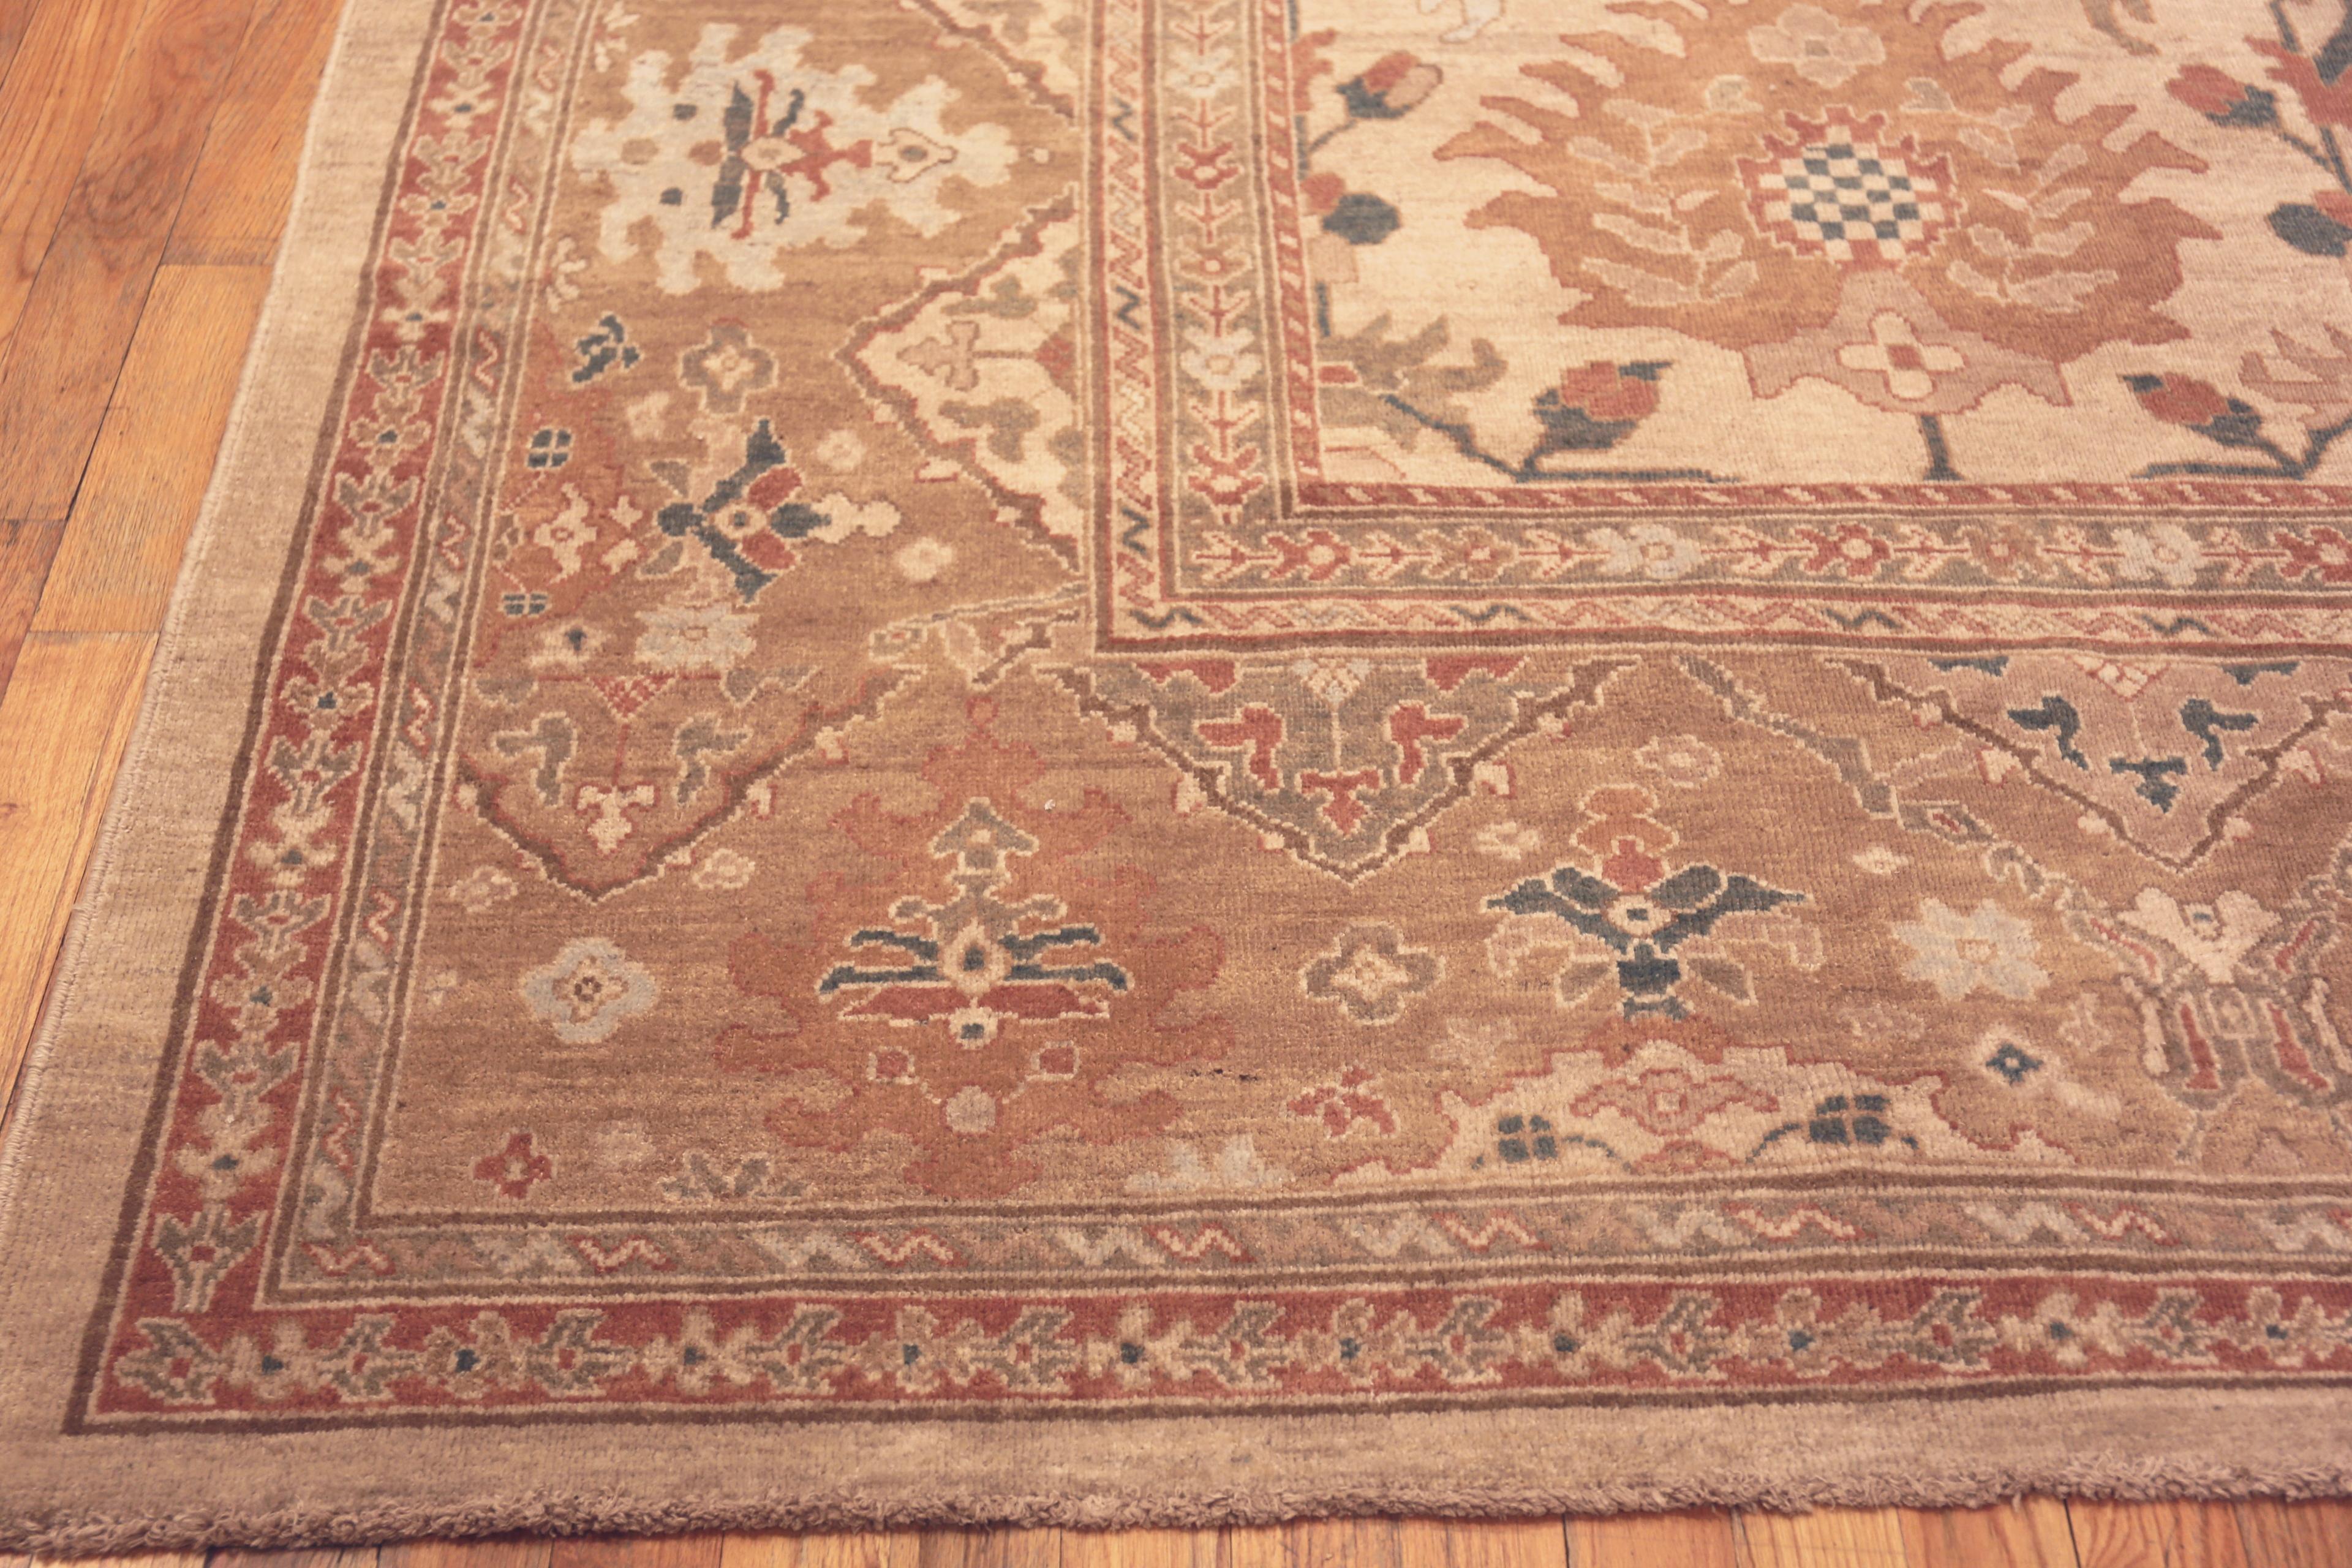 Collection Nazmiyal - Grand tapis persan moderne de Sultanabad. 12 pieds 6 po. x 17 pieds 6 po. Neuf - En vente à New York, NY